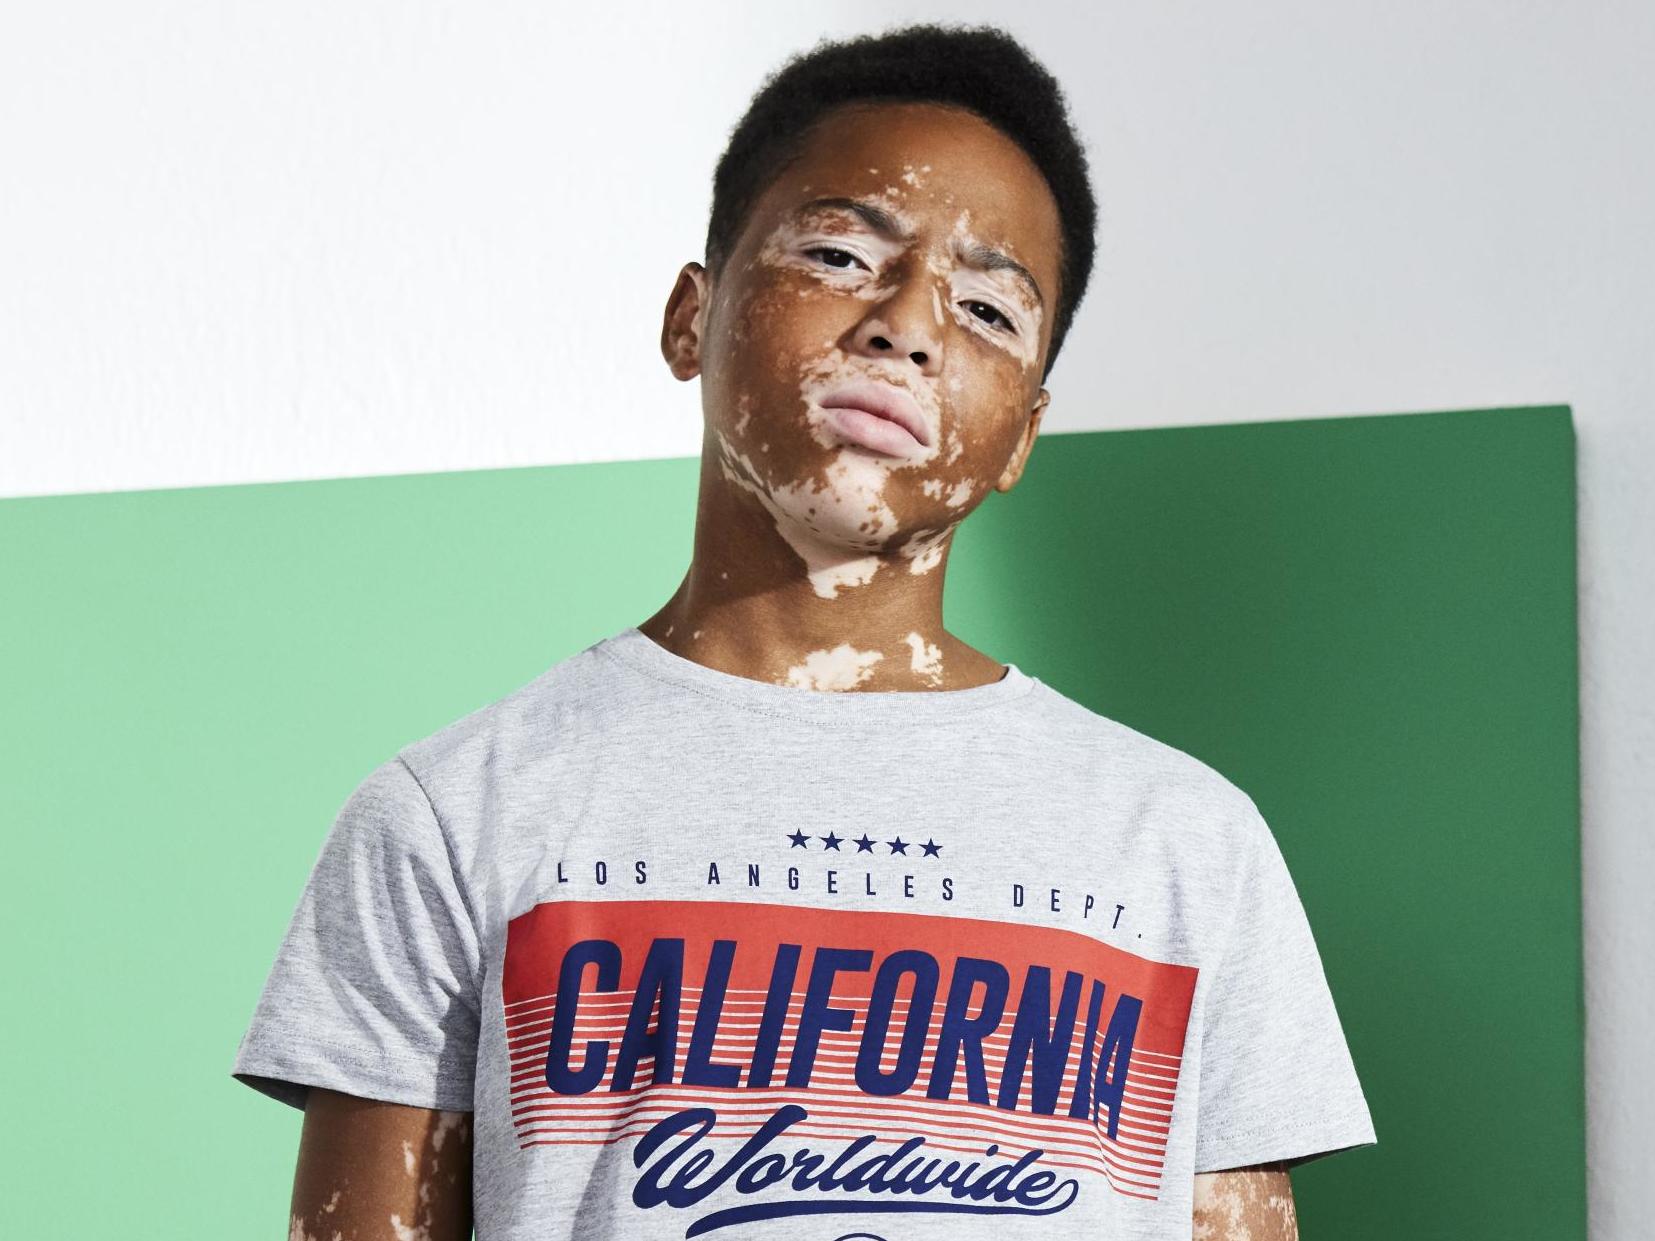 Primark praised for featuring model with vitiligo in fashion campaigns, The Independent